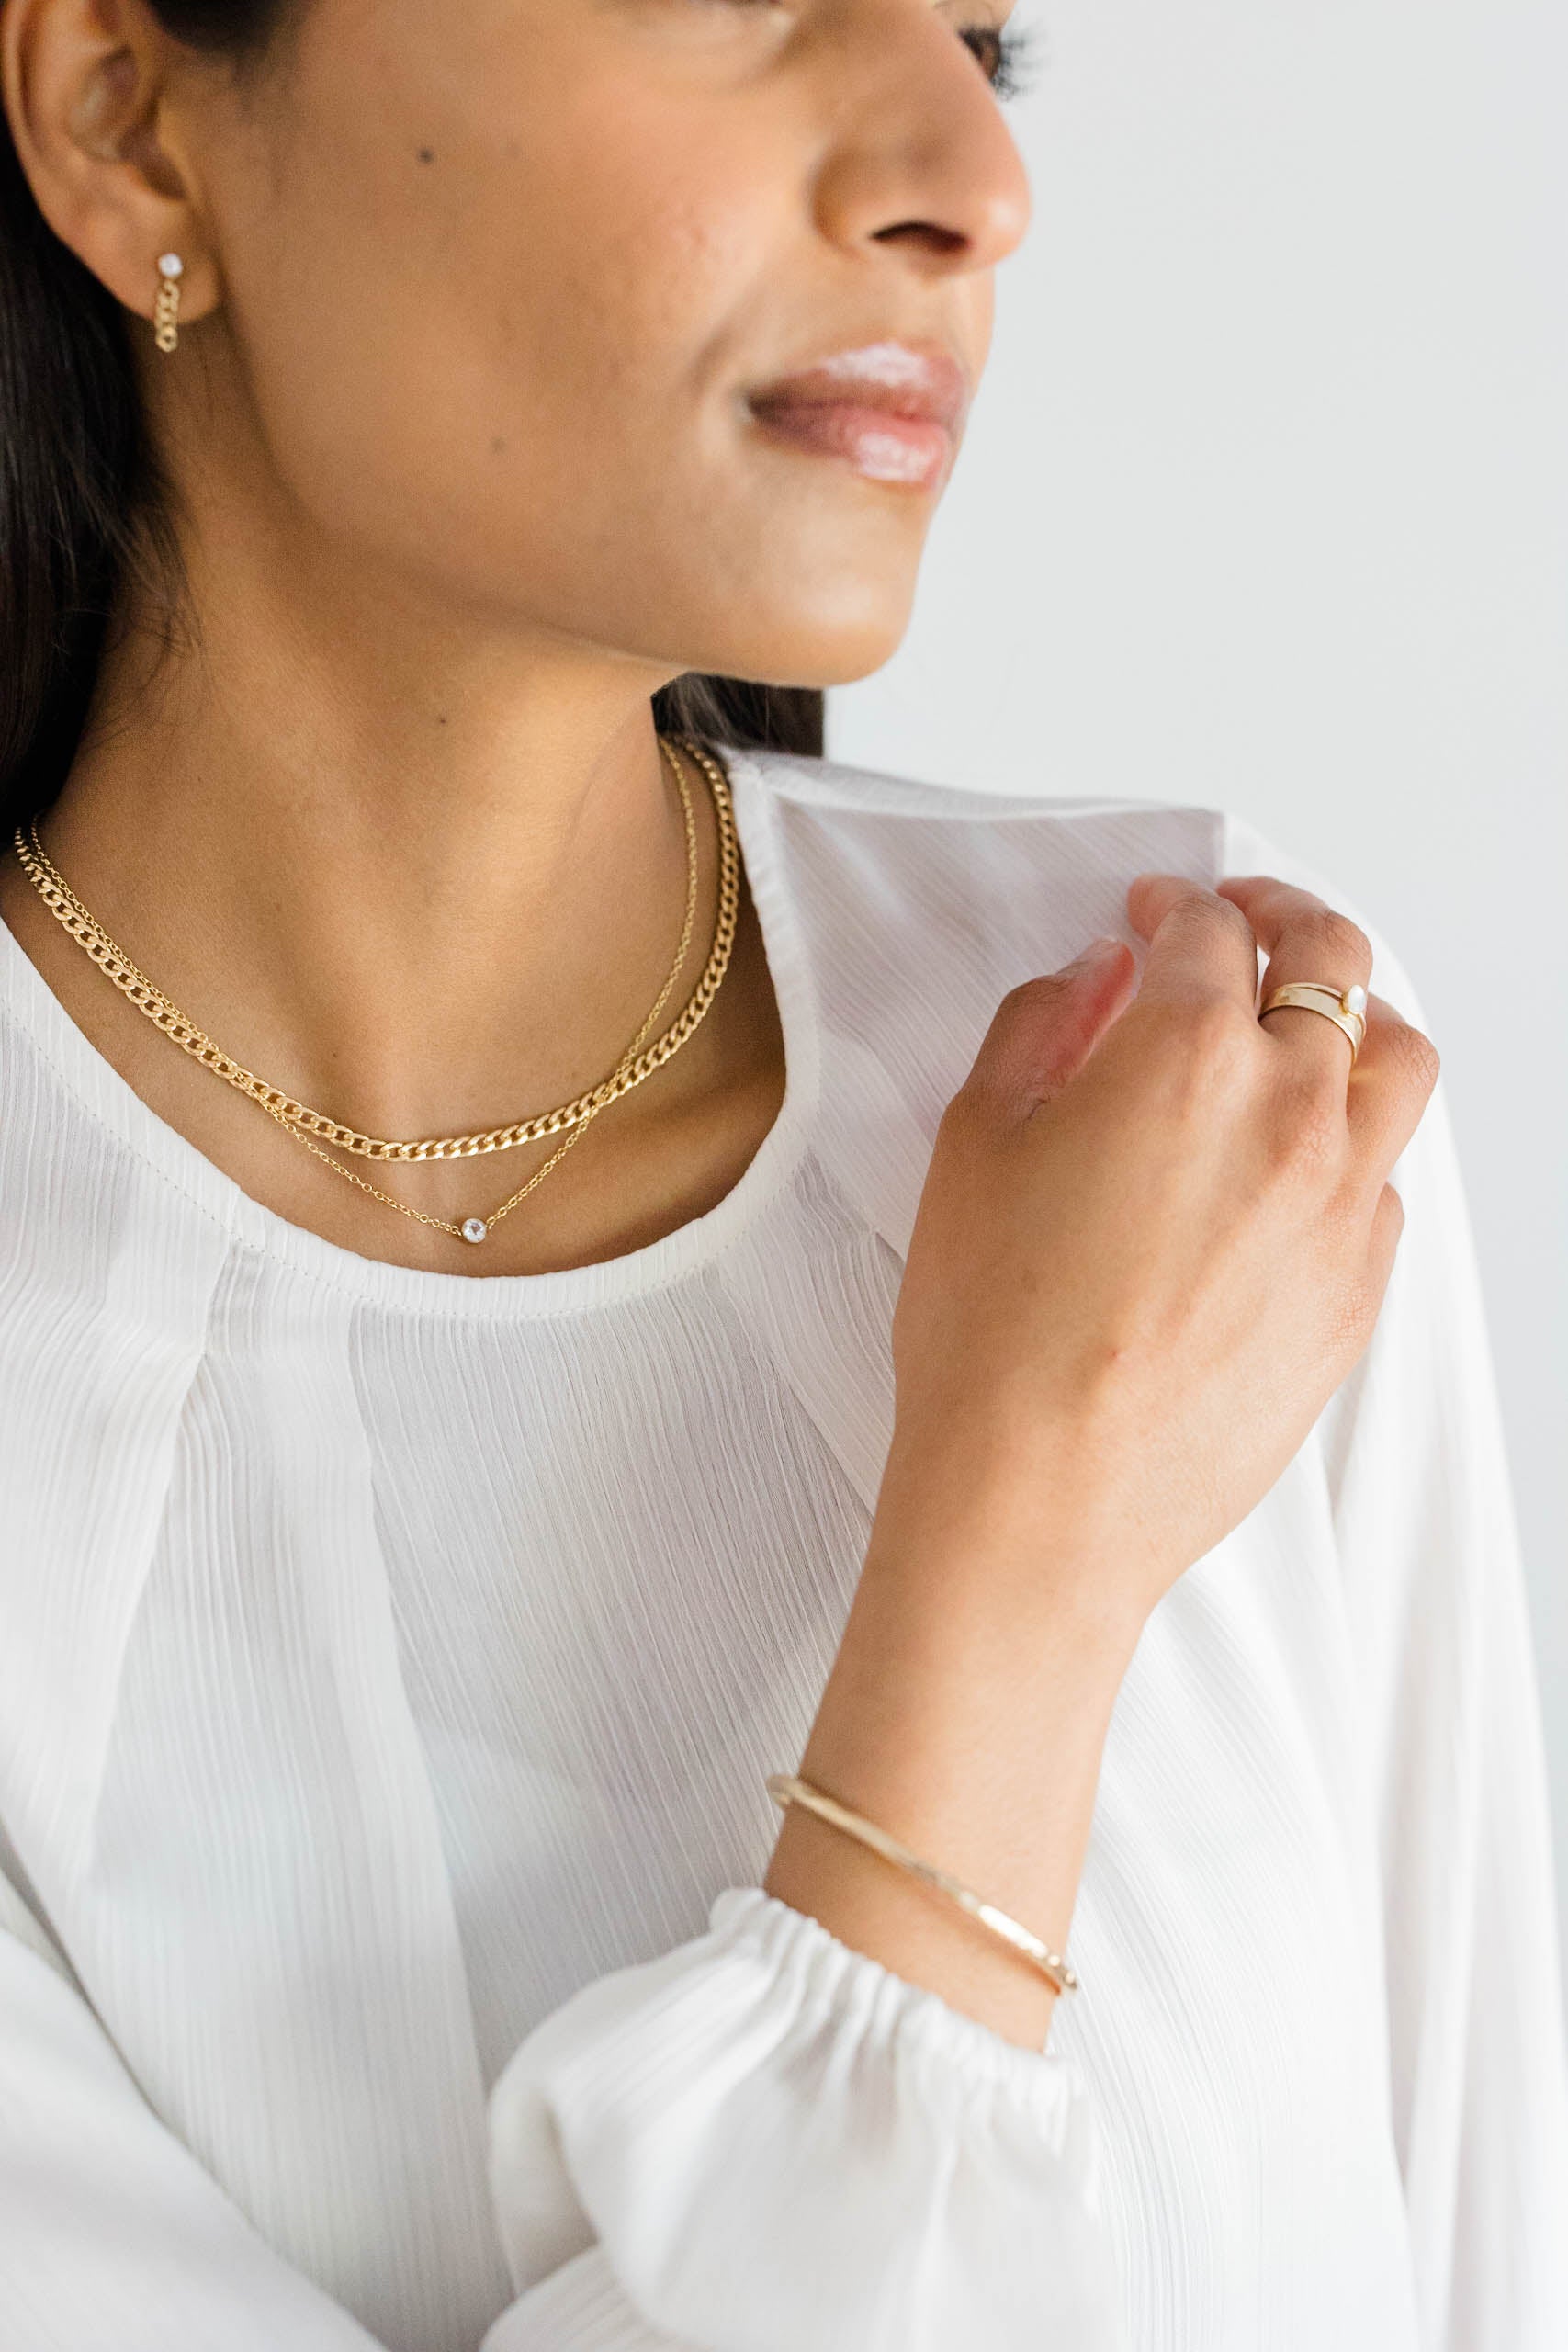 Timeless gold curb chain can be worn with other necklaces, for a layered look